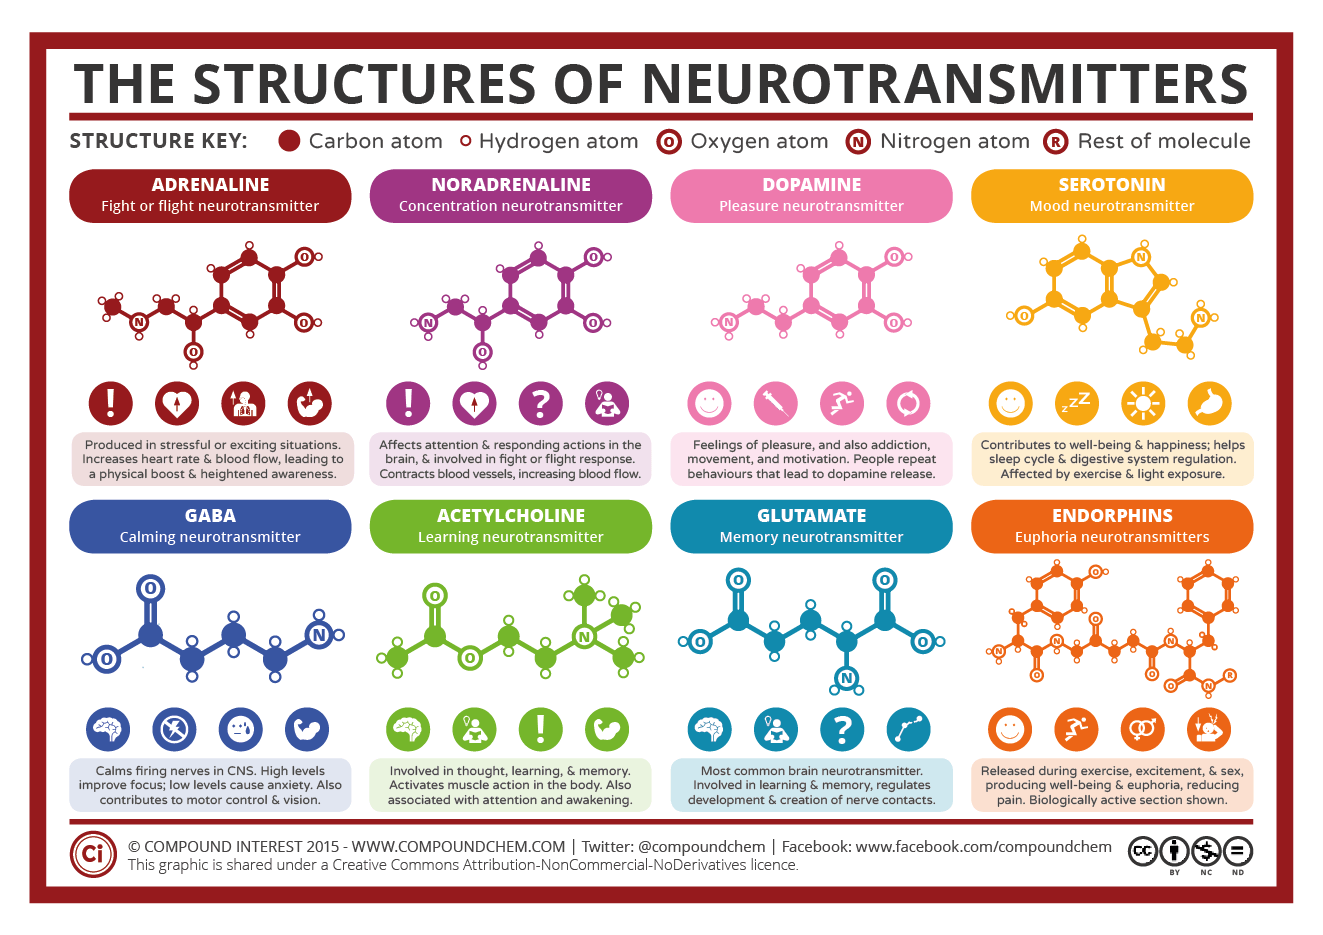 Chemical-Structures-of-Neurotransmitters-2015.png